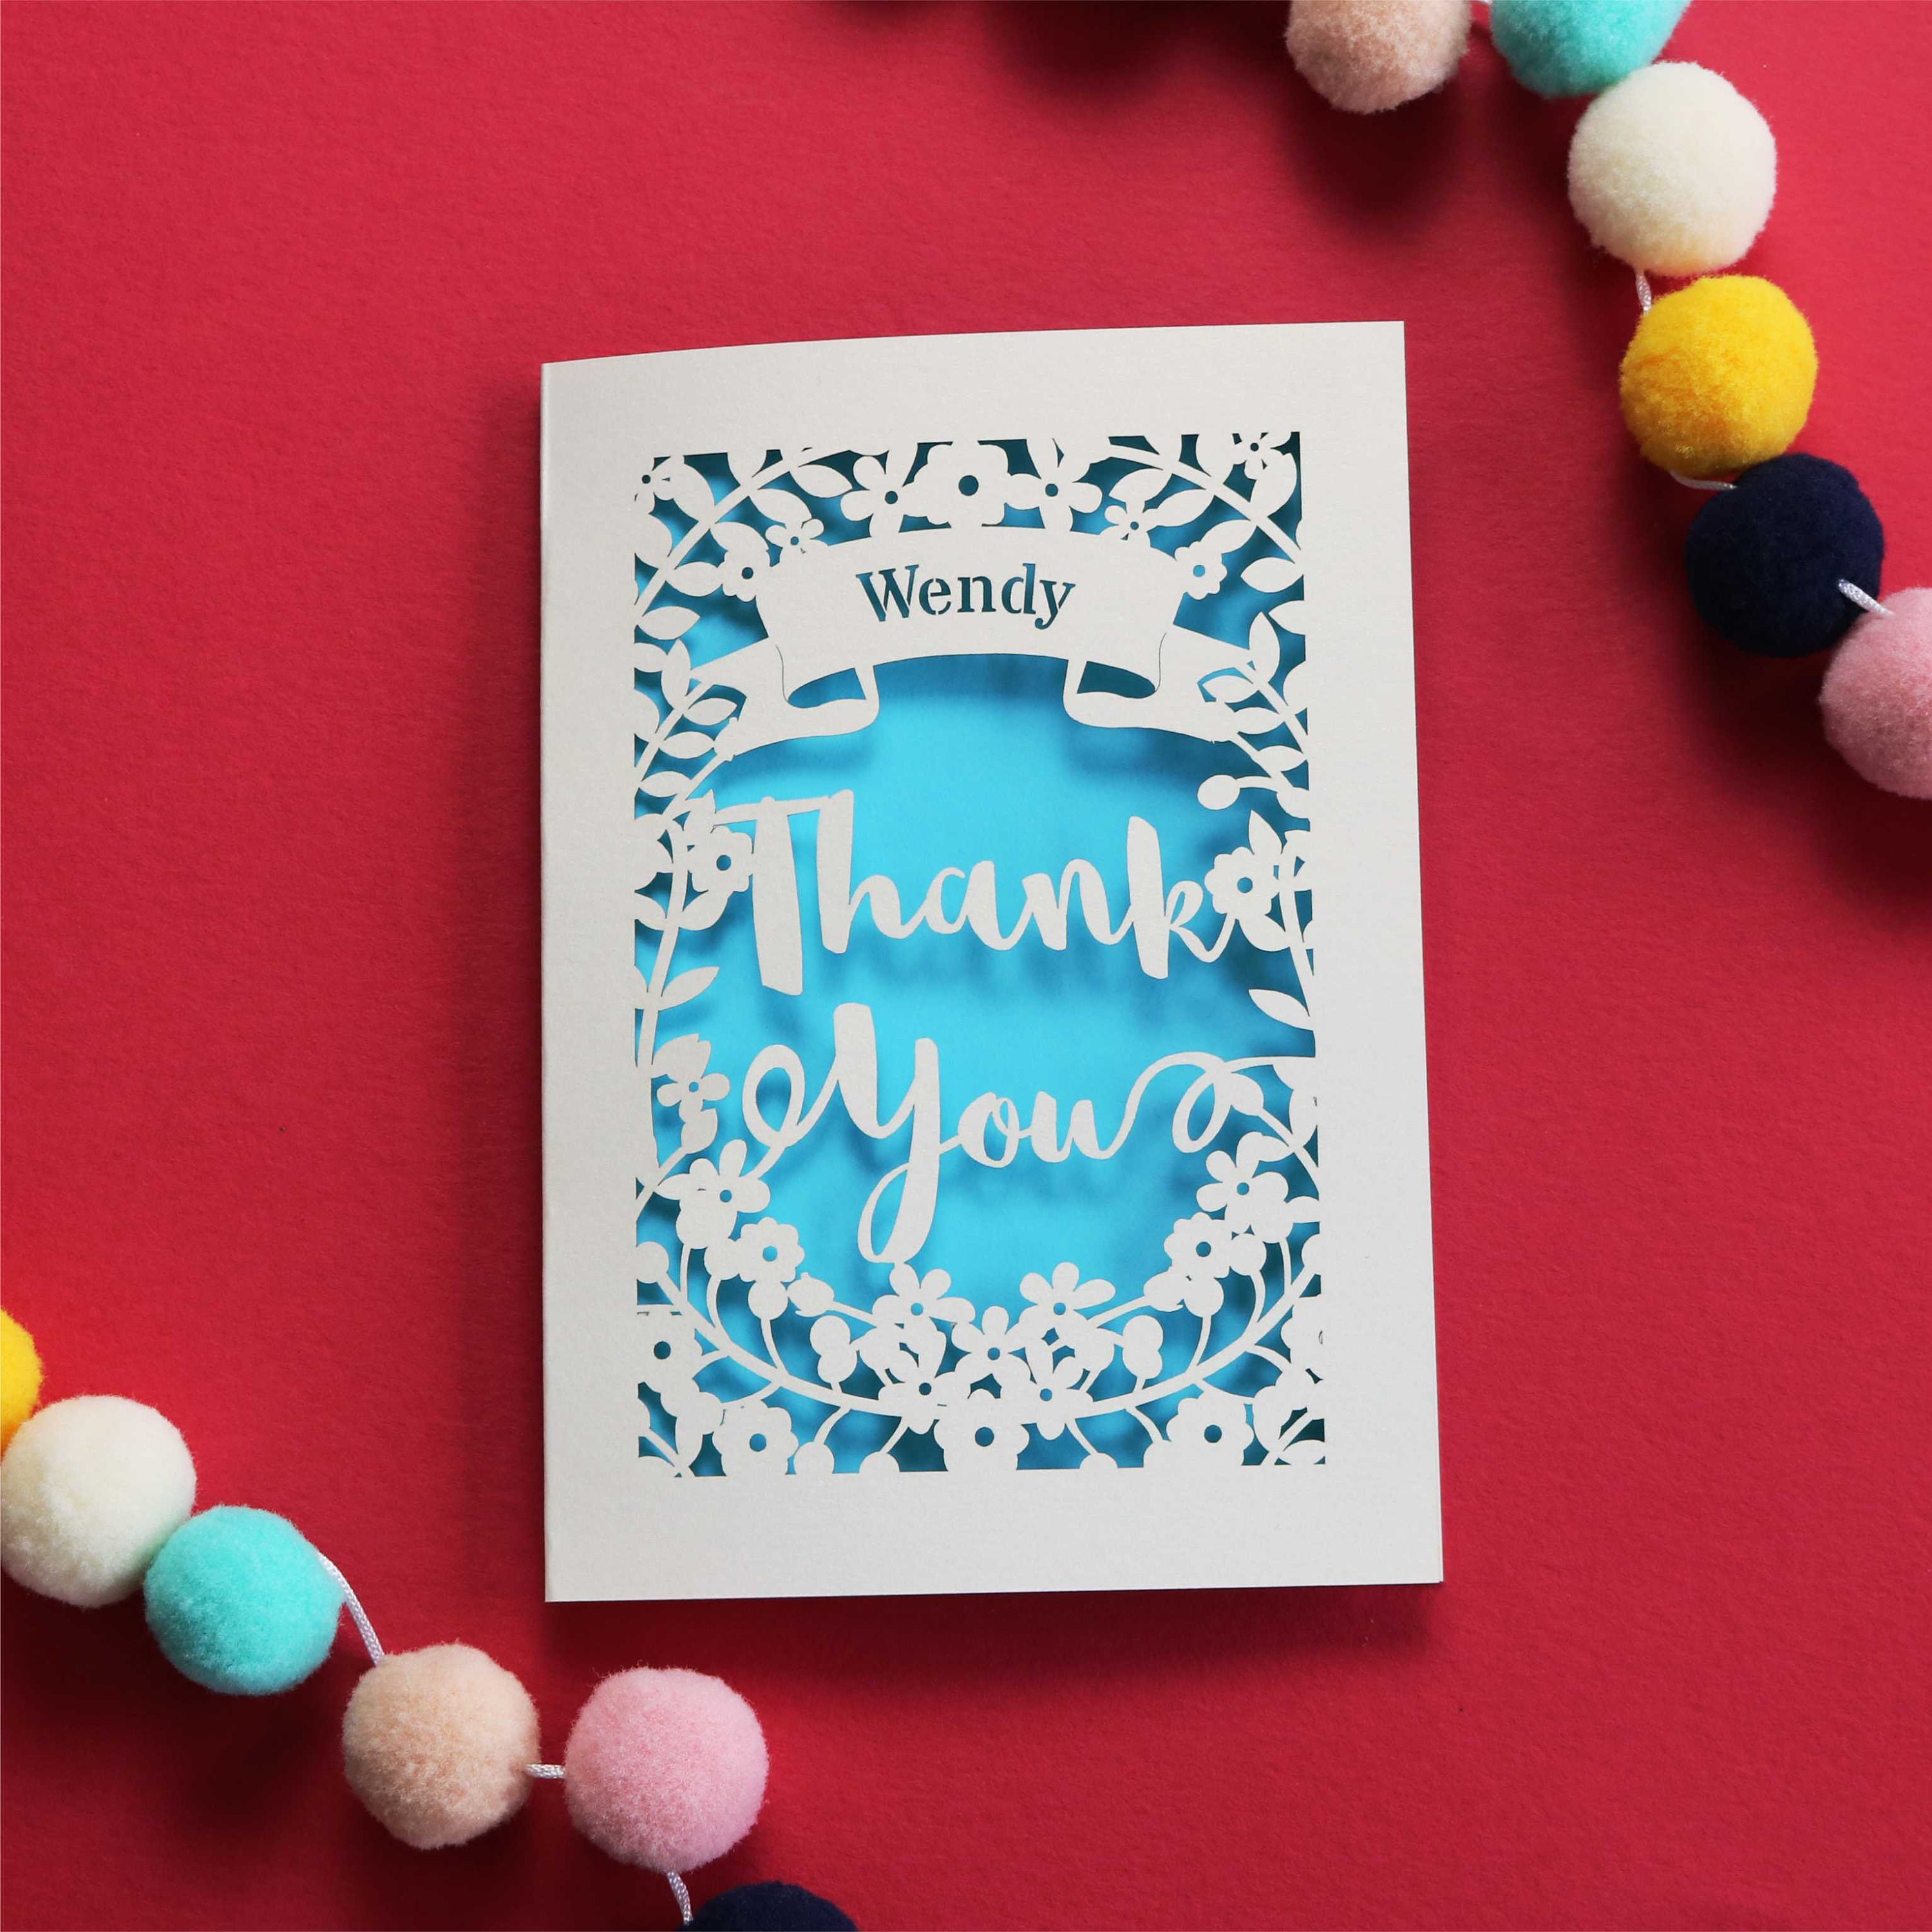 PAPYRUS® Thank You Card Classic Laser Cut